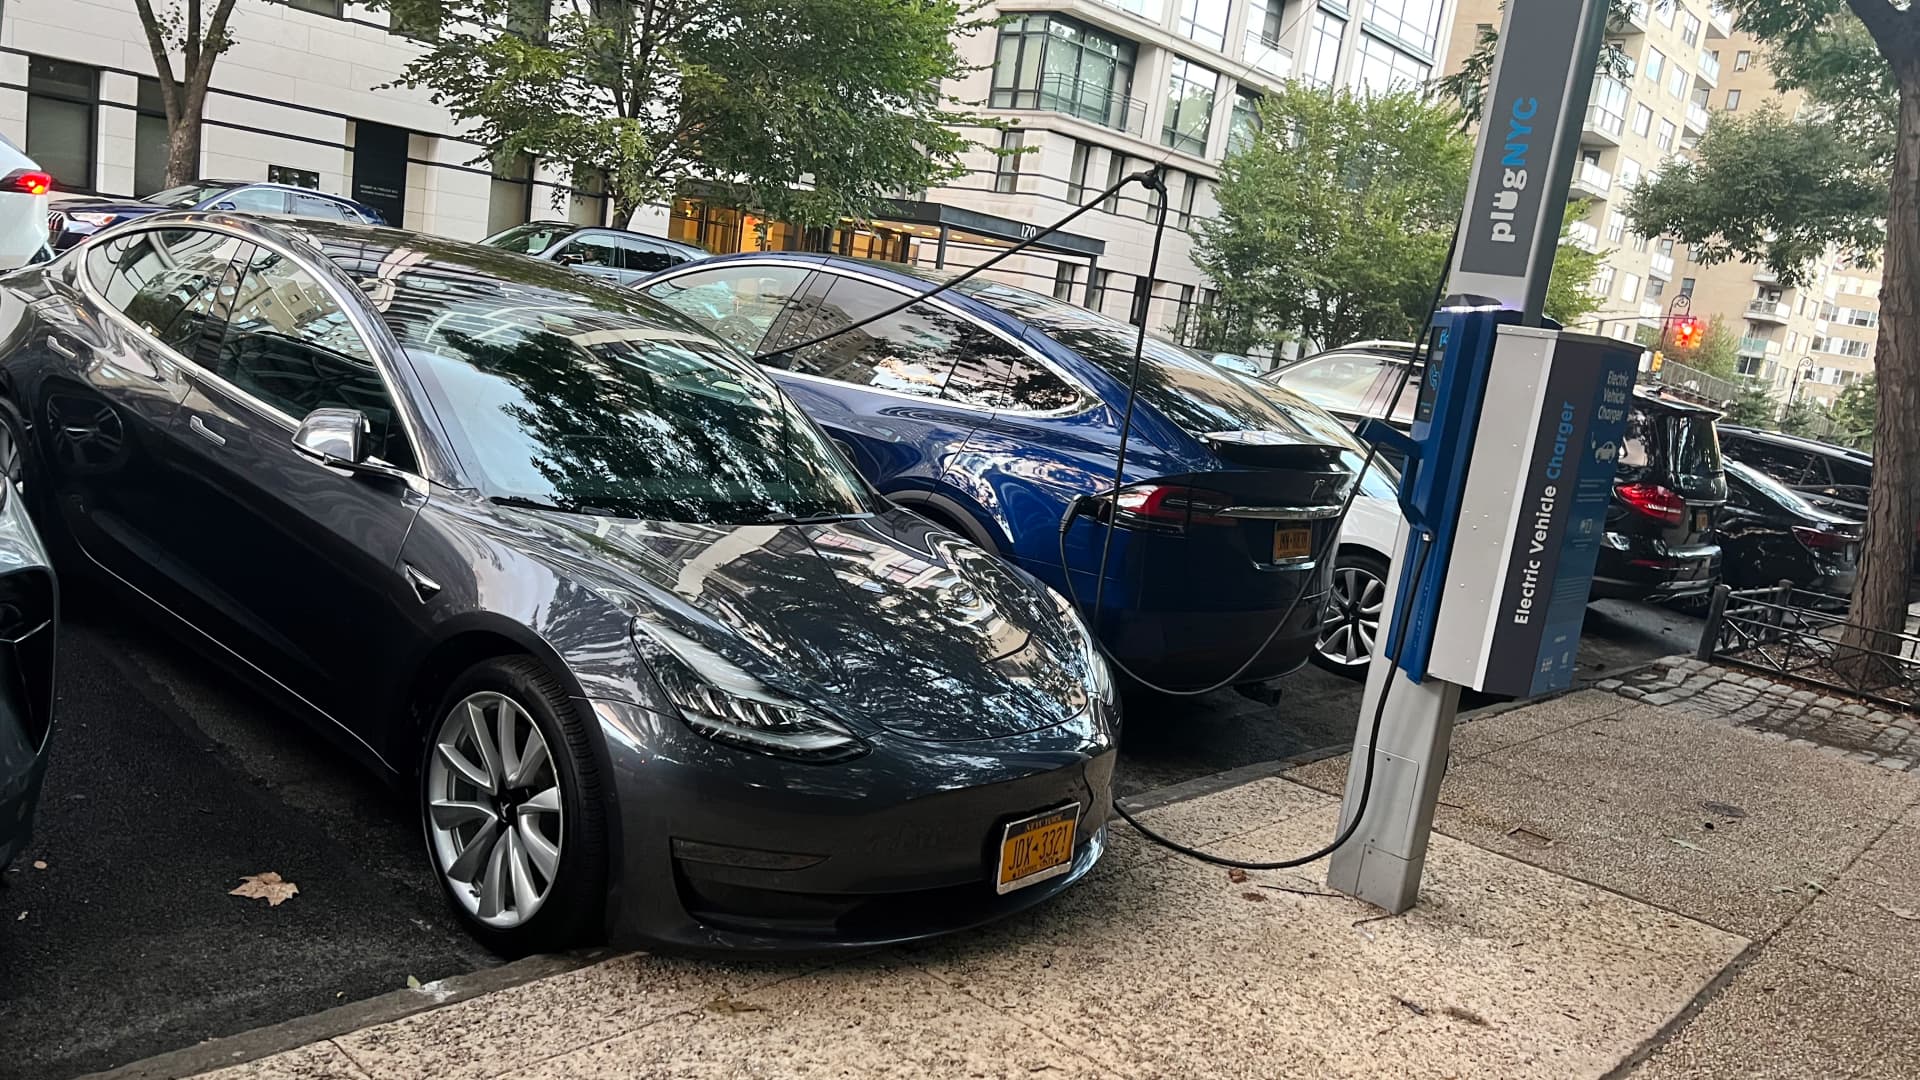 A NYC charging station seen in the Yorkville neighborhood of New York City.